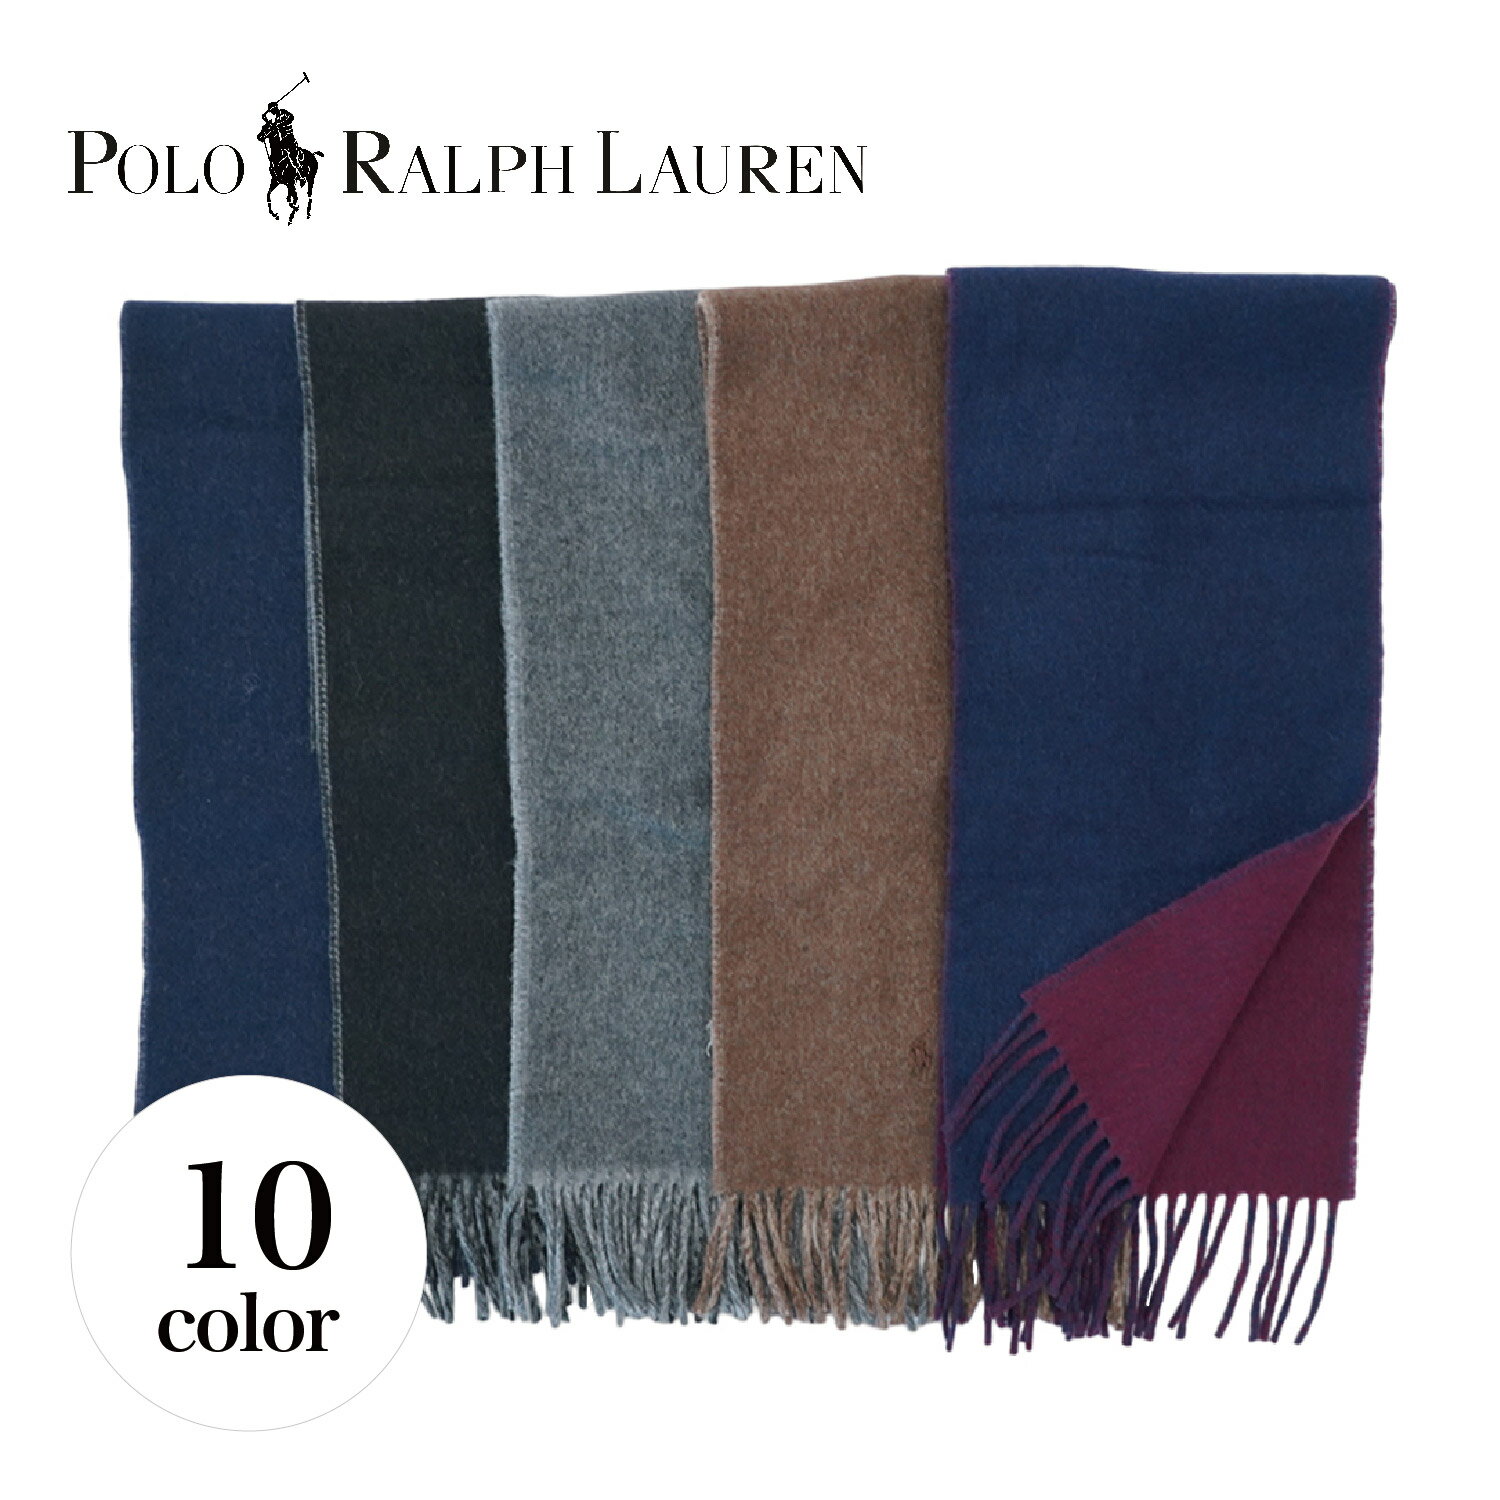 yő1000~OFFN[|zzz POLO RALPH LAUREN | t[ }t[ Y fB[X E[ o[Vu CLASSIC REVERSIBLE SCARF PC0455